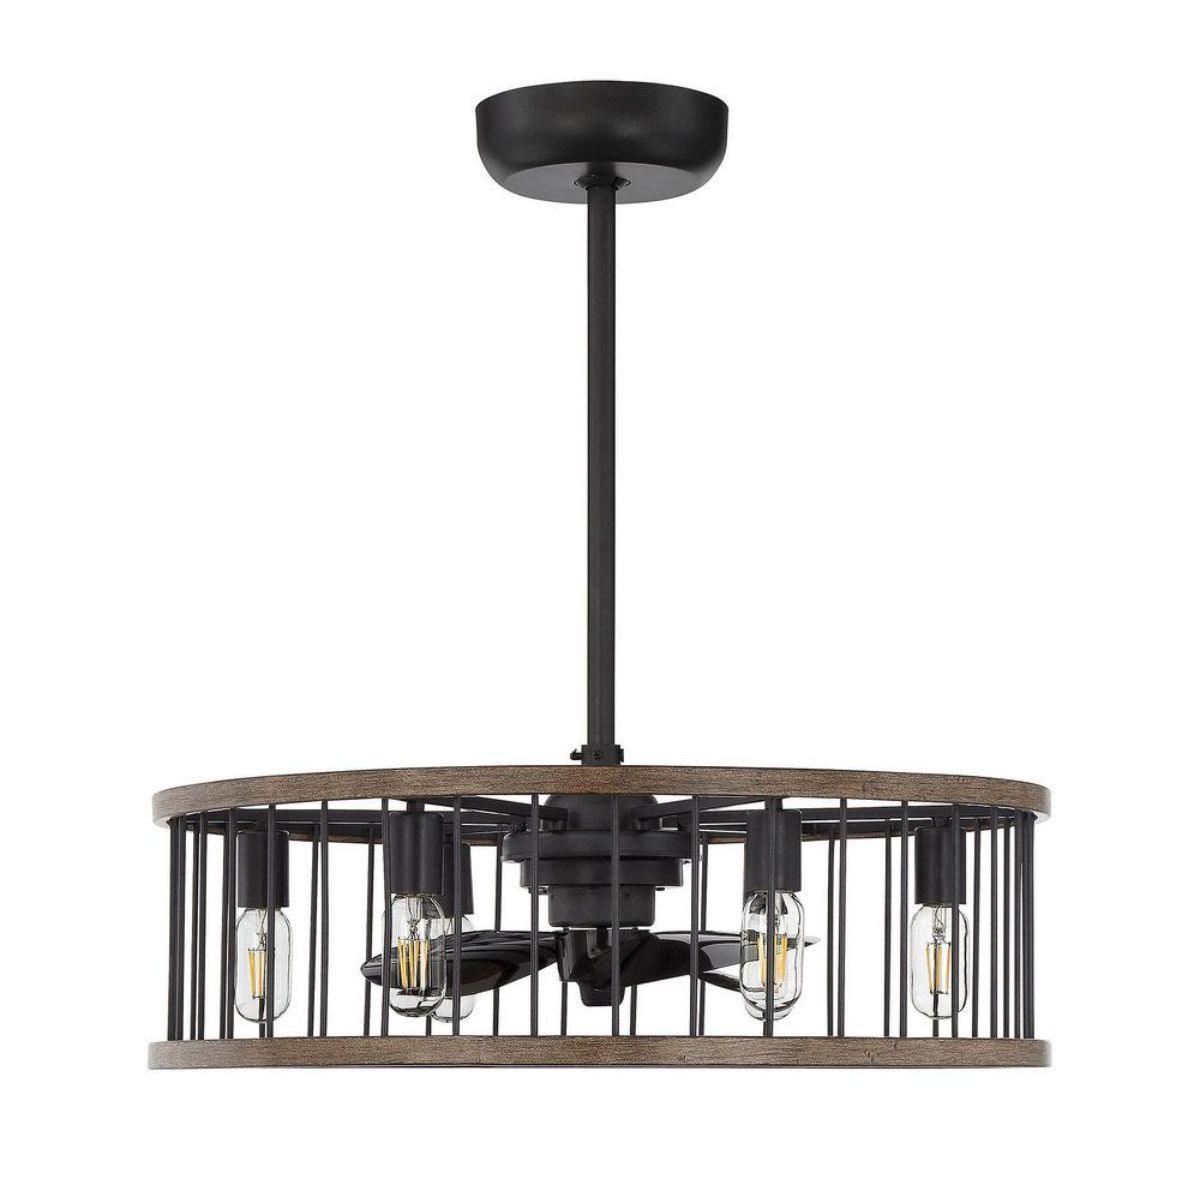 Kona 26 Inch Chandelier Outdoor Ceiling Fan With Light And Remote, Sapele Finish - Bees Lighting